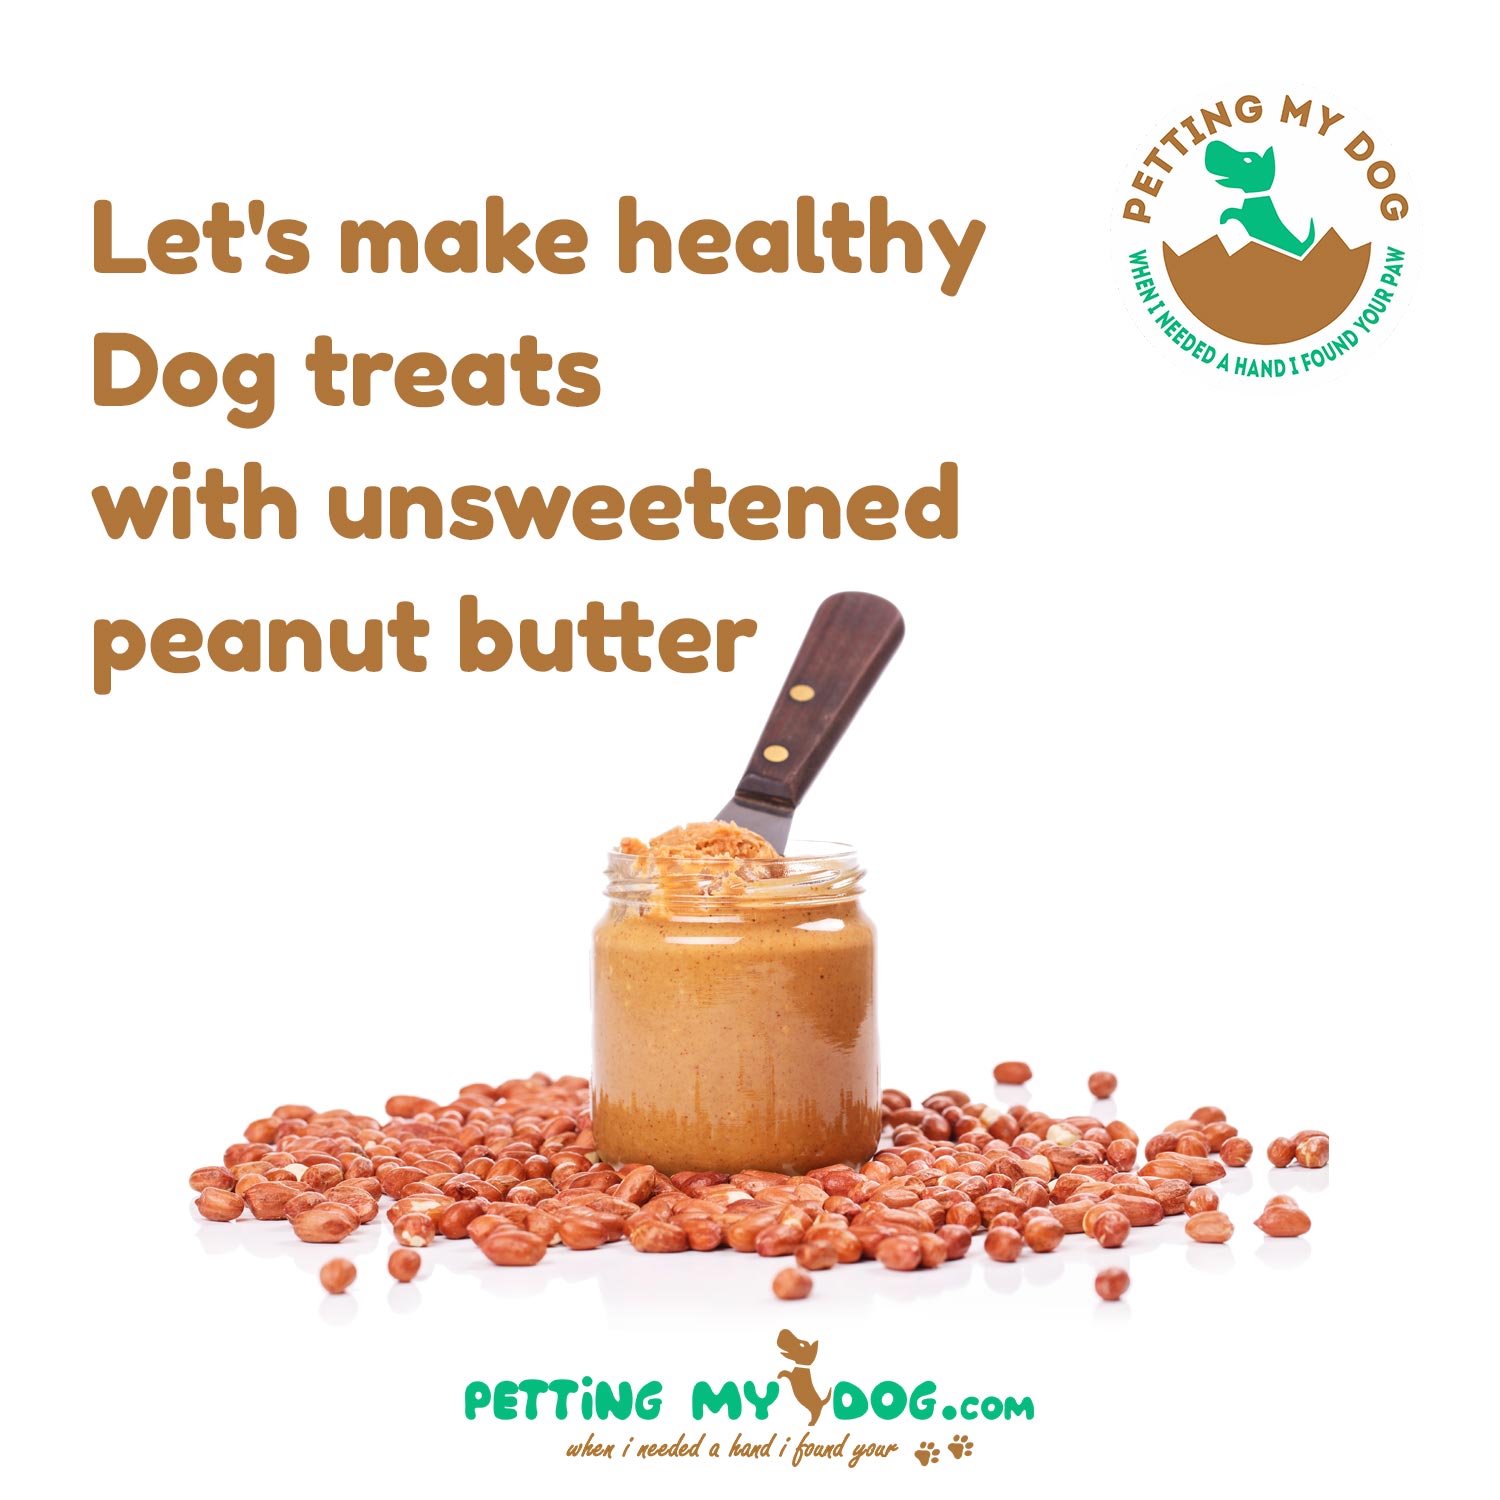 its time to make healthy Dog treats with unsweetened peanut butter